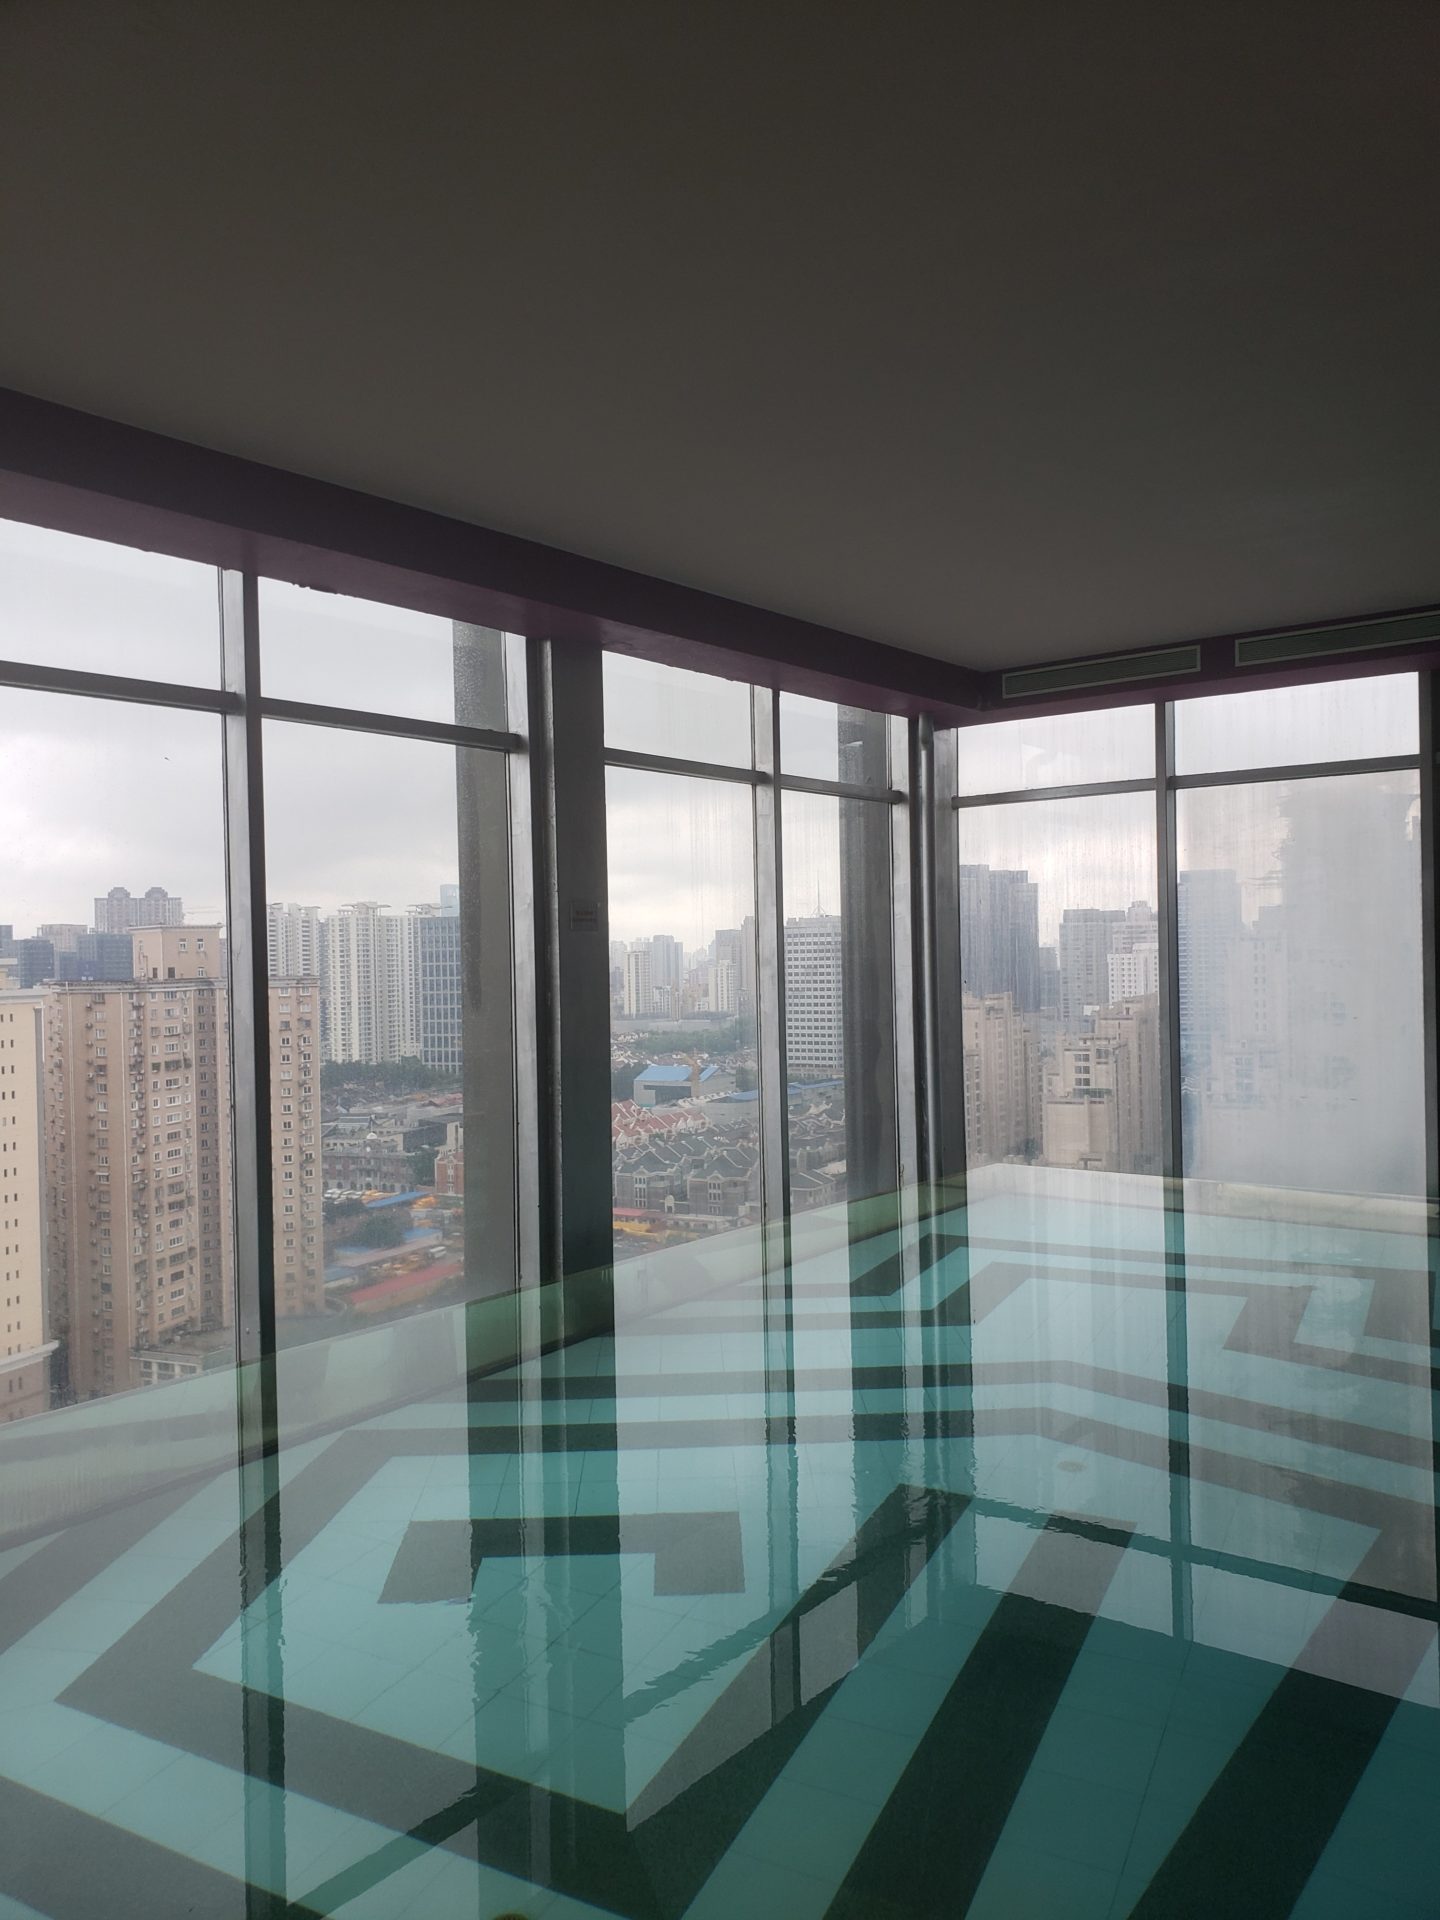 a large glass floor with a view of a city